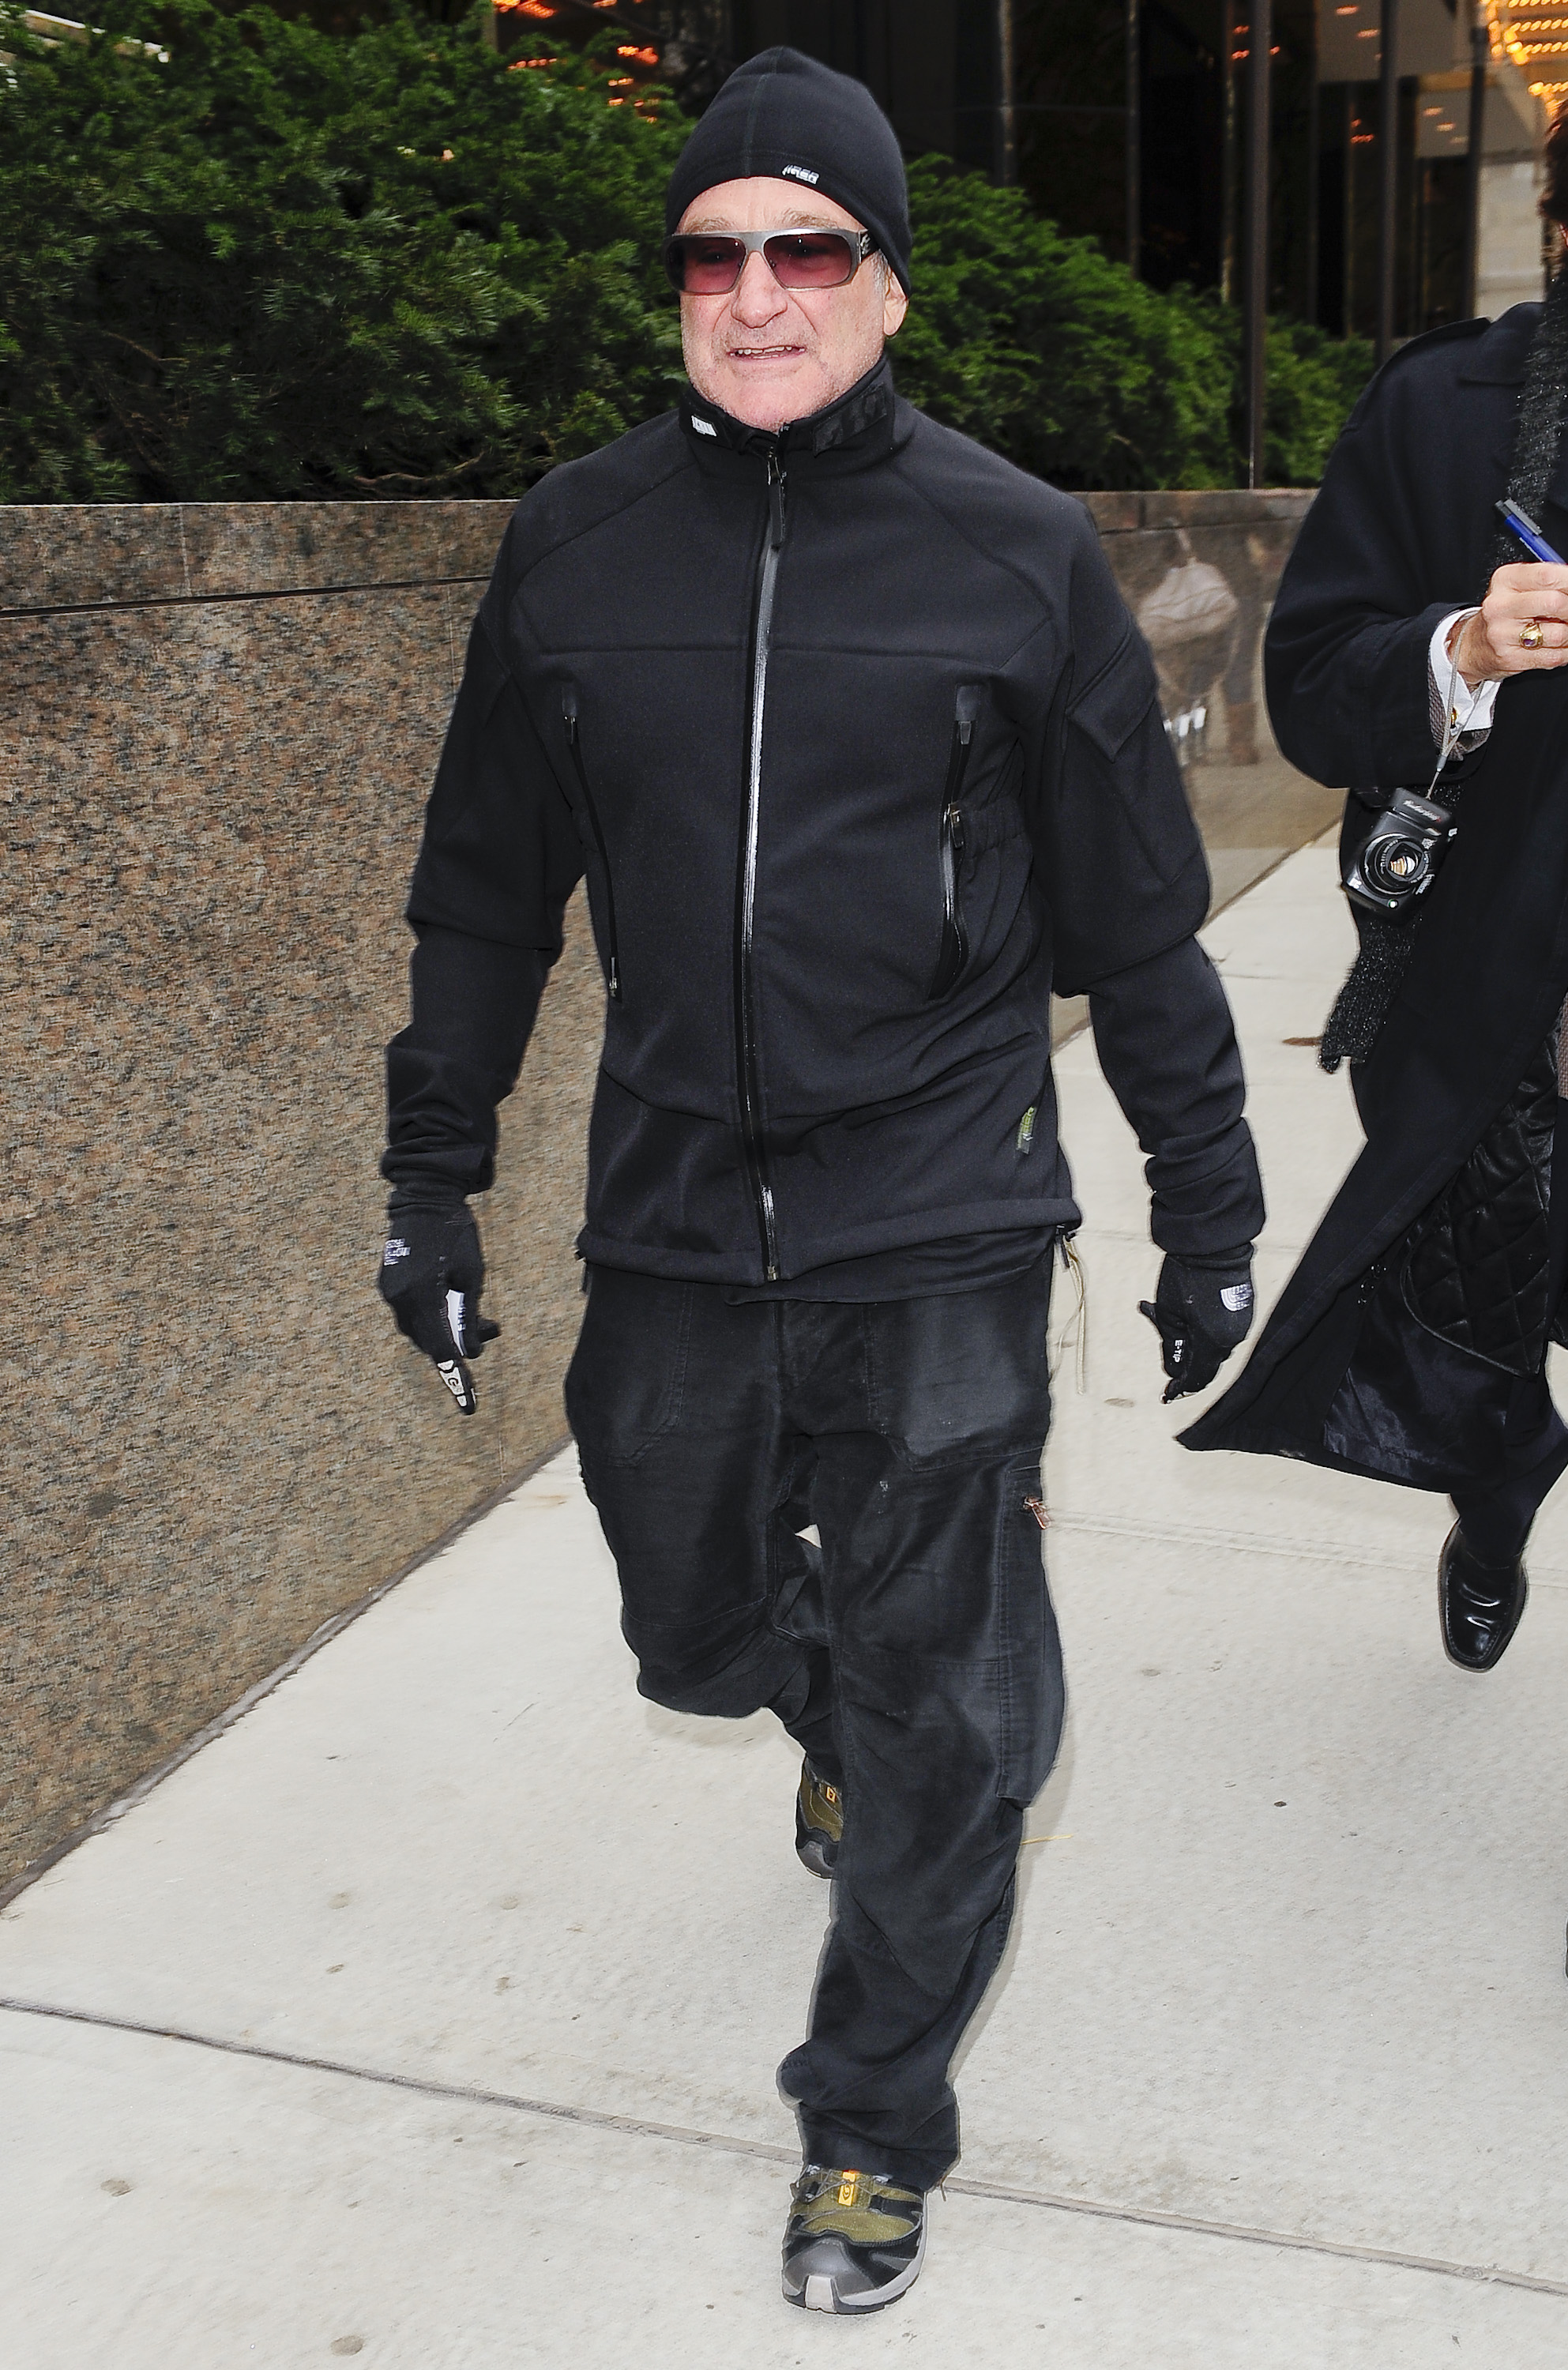 Robin Williams wearing Acronym's J-16 jacket with North Face in 2009